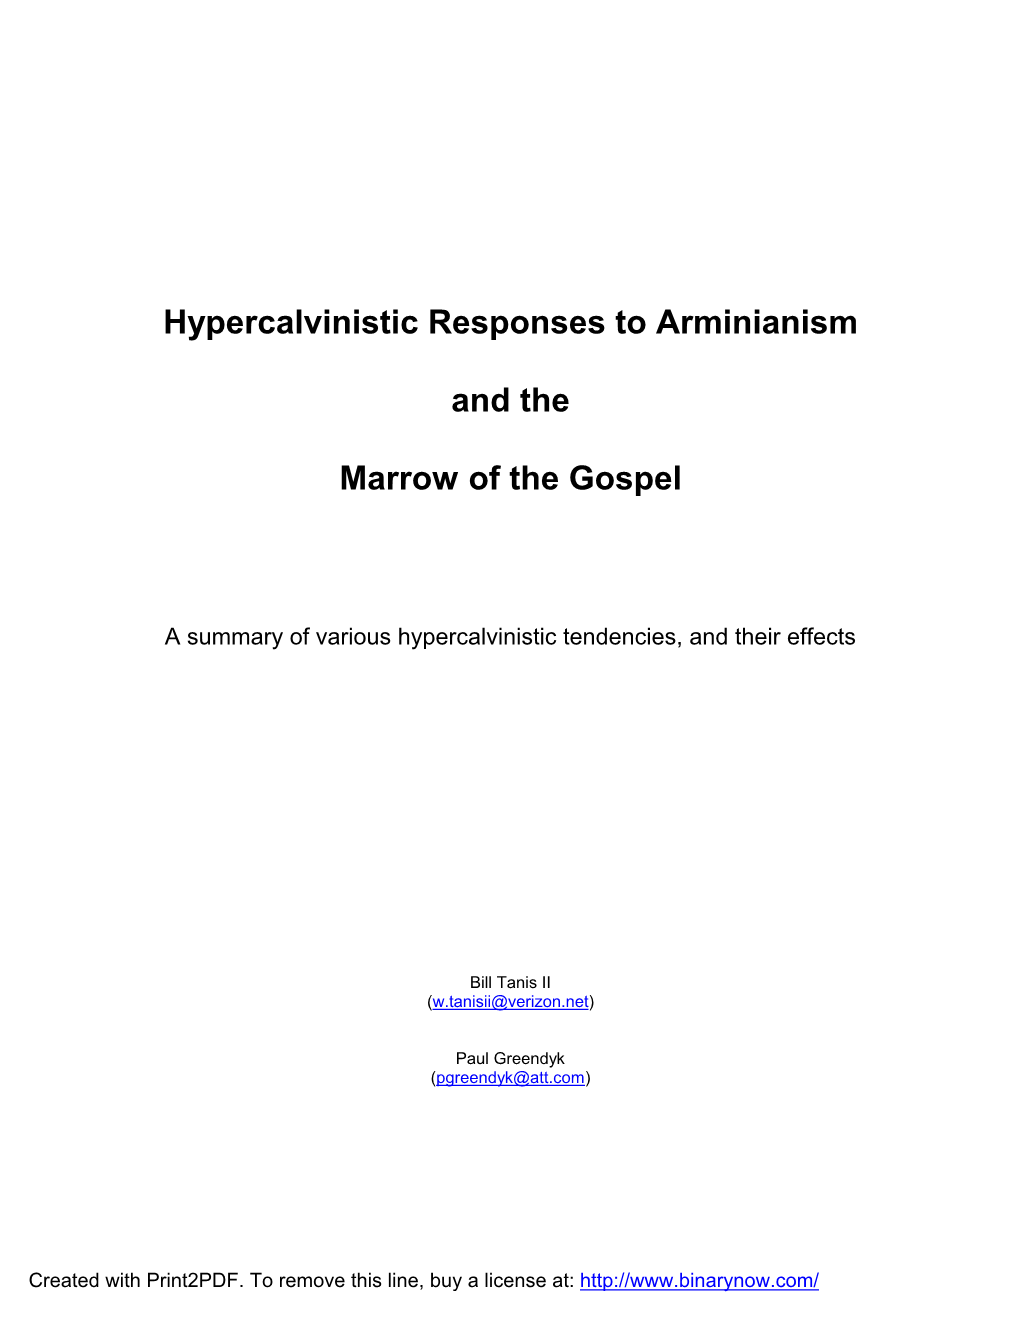 Hypercalvinistic Responses to Arminianism and the Marrow of The